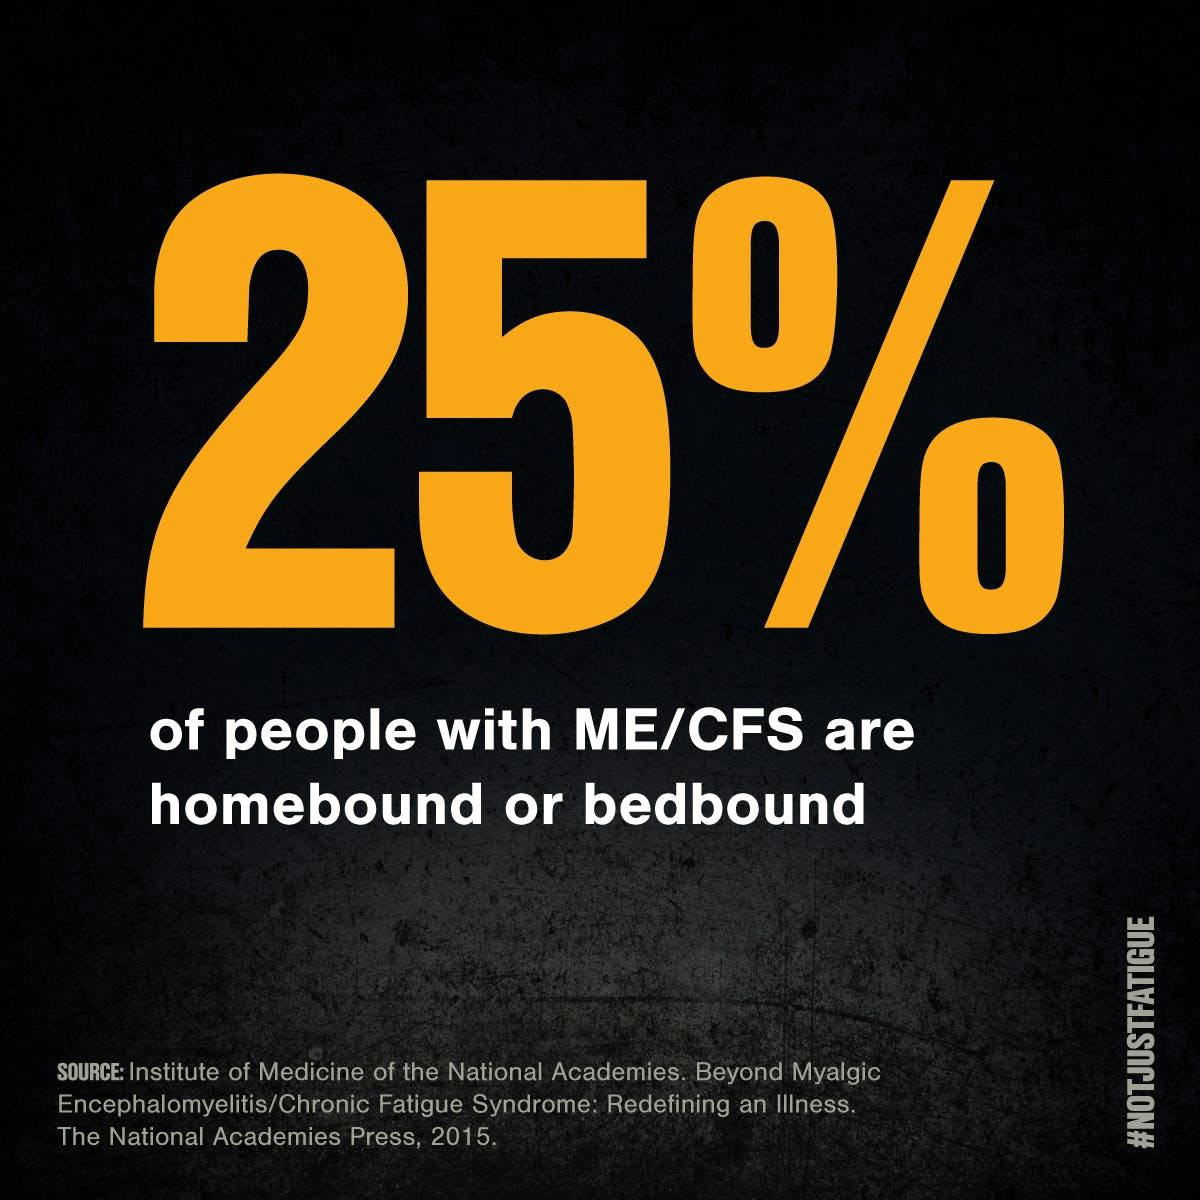 25% of people with ME/CFS are homebound or bedbound